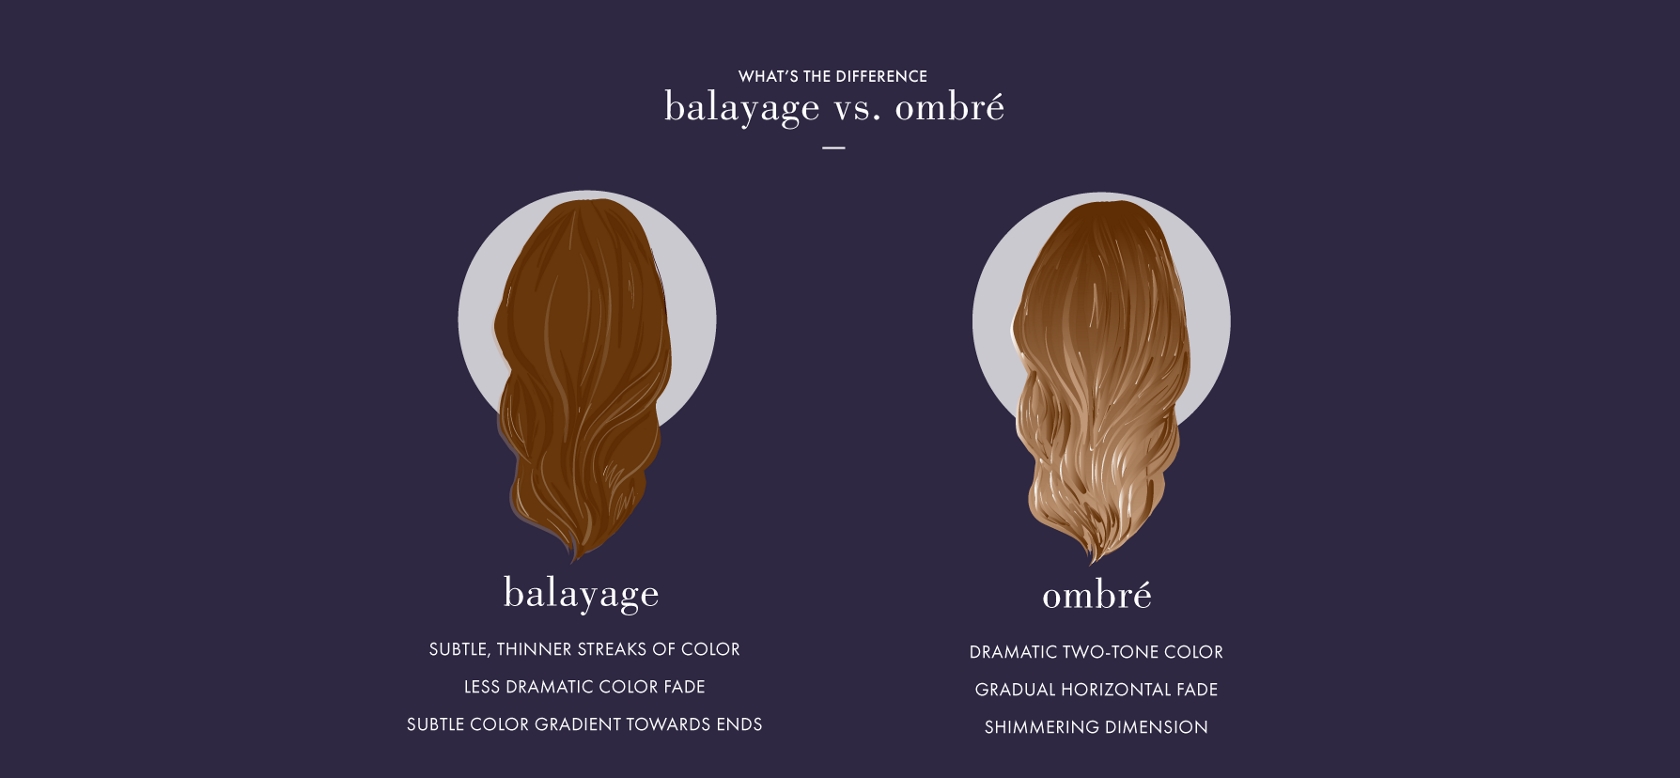 Balayage vs. Ombre: Which is Best for You? | Hair Care by John Frieda